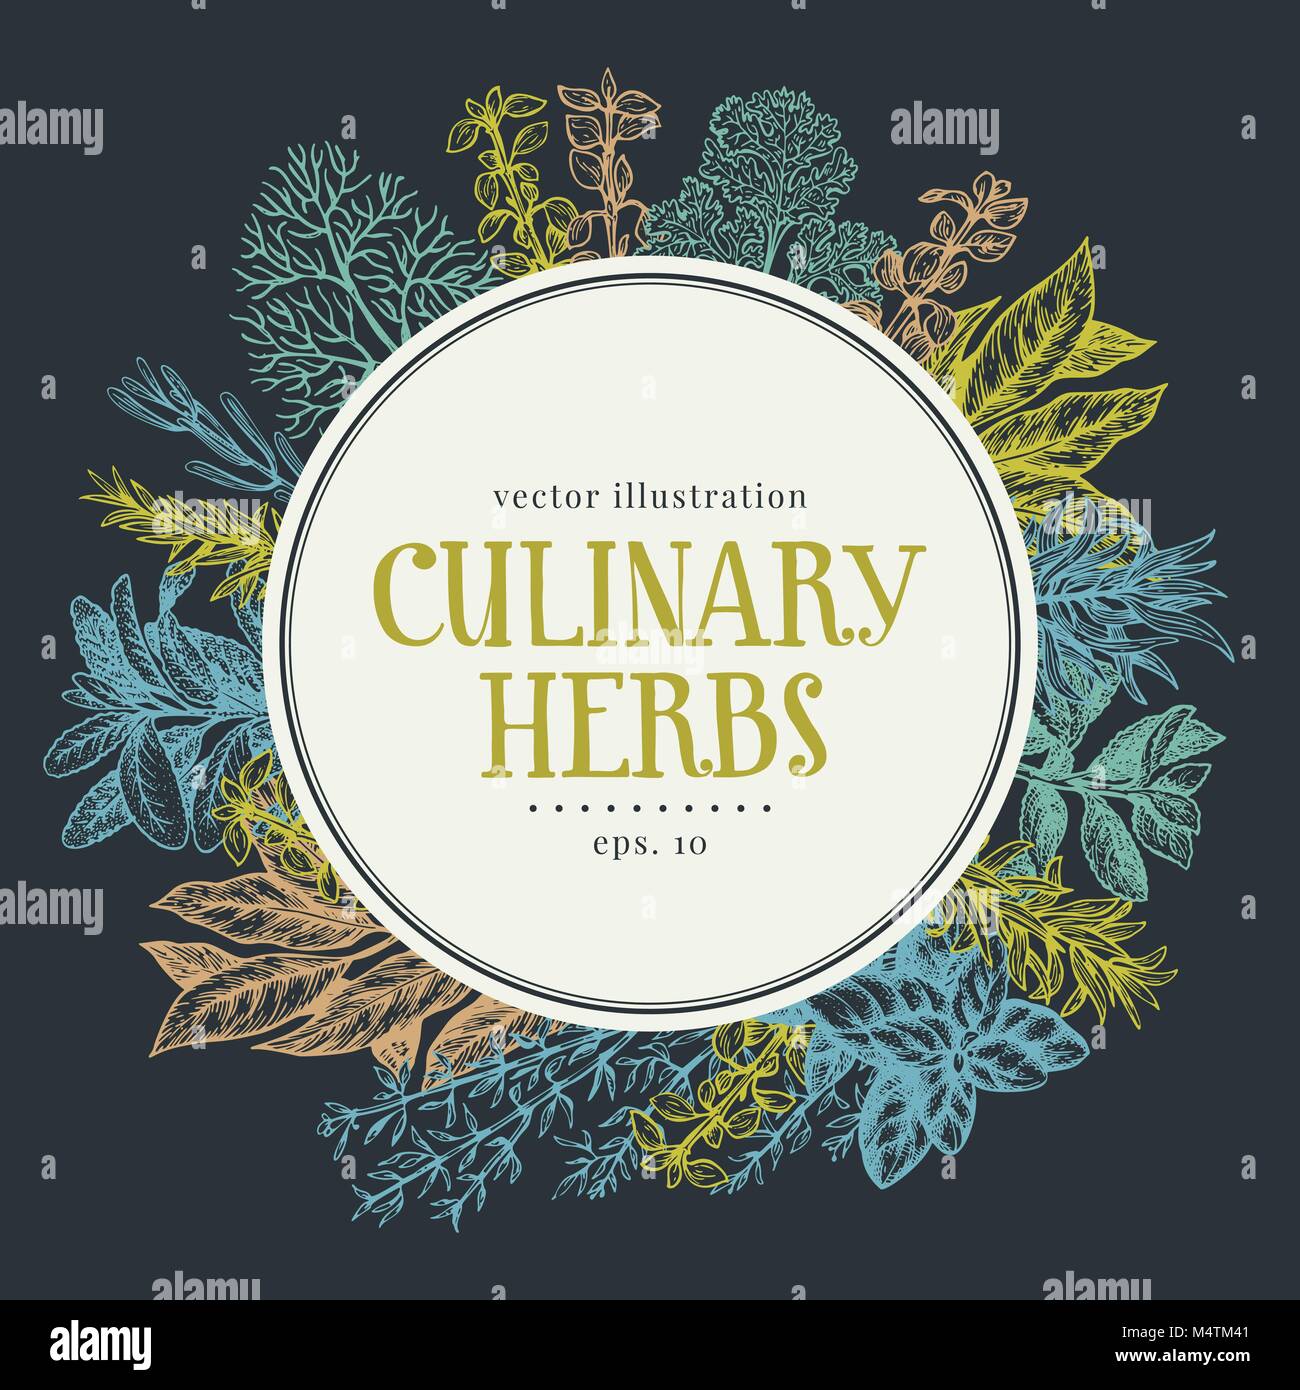 Hand drawn frame with culinary herbs and spices. Vector background for design menu, packaging, recipes, label, farm market products. Hand drawn vintage illustration. Botanical banner template. Stock Vector